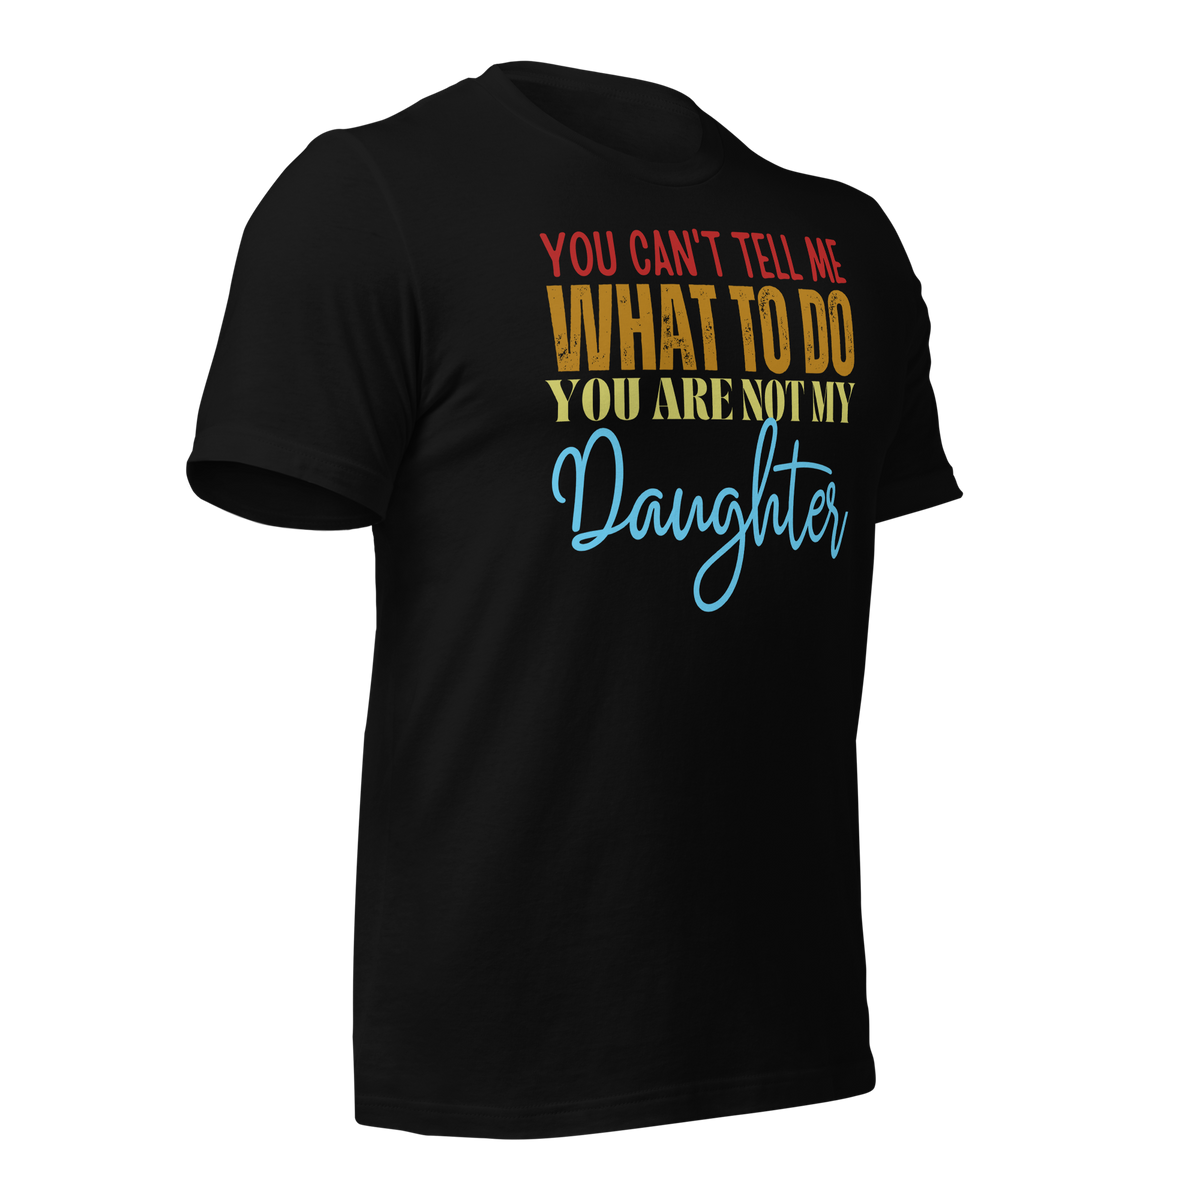 Dad Shirt, Fathers Day Shirt, Funny Mens Shirt, Funny Dad Shirt, Tell me what to do, Gift for him, Gift for her, New Papa Gift, Funny Mom Shirt, Mom Shirt, New Dad Shirt, Father Shirt, Dad tee, You Can't tell me What To Do You Are Not My Daughter Shirt